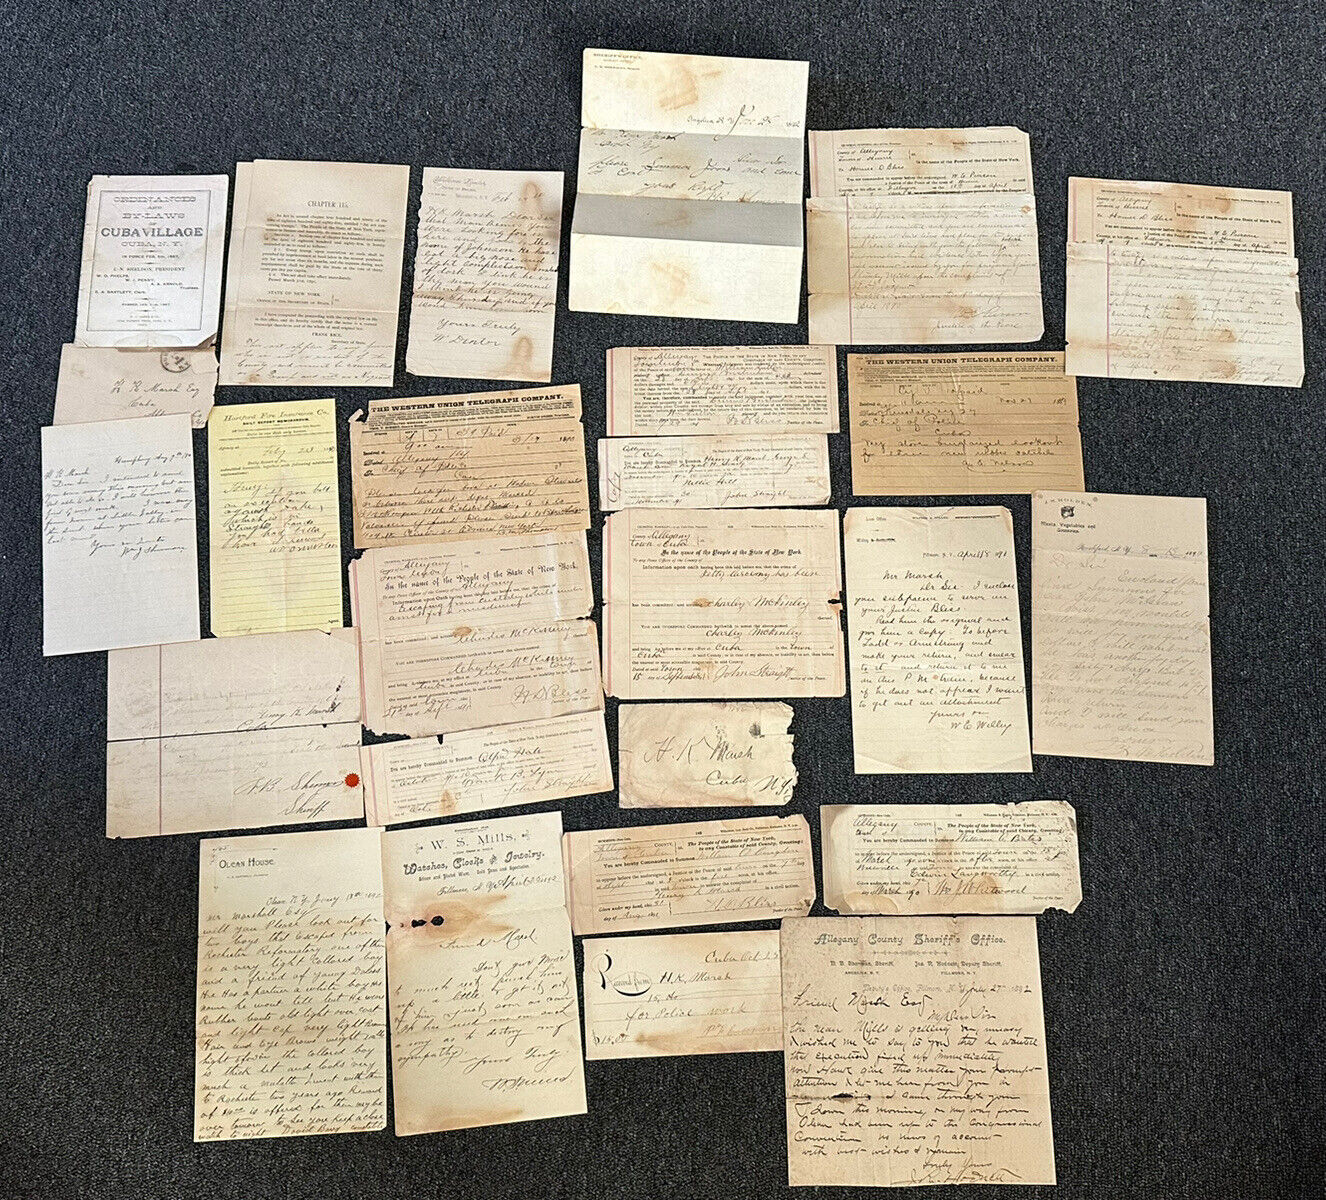 1890s CUBA NY Chief of Police Letter lot tramp law Rare paper summons sheriff